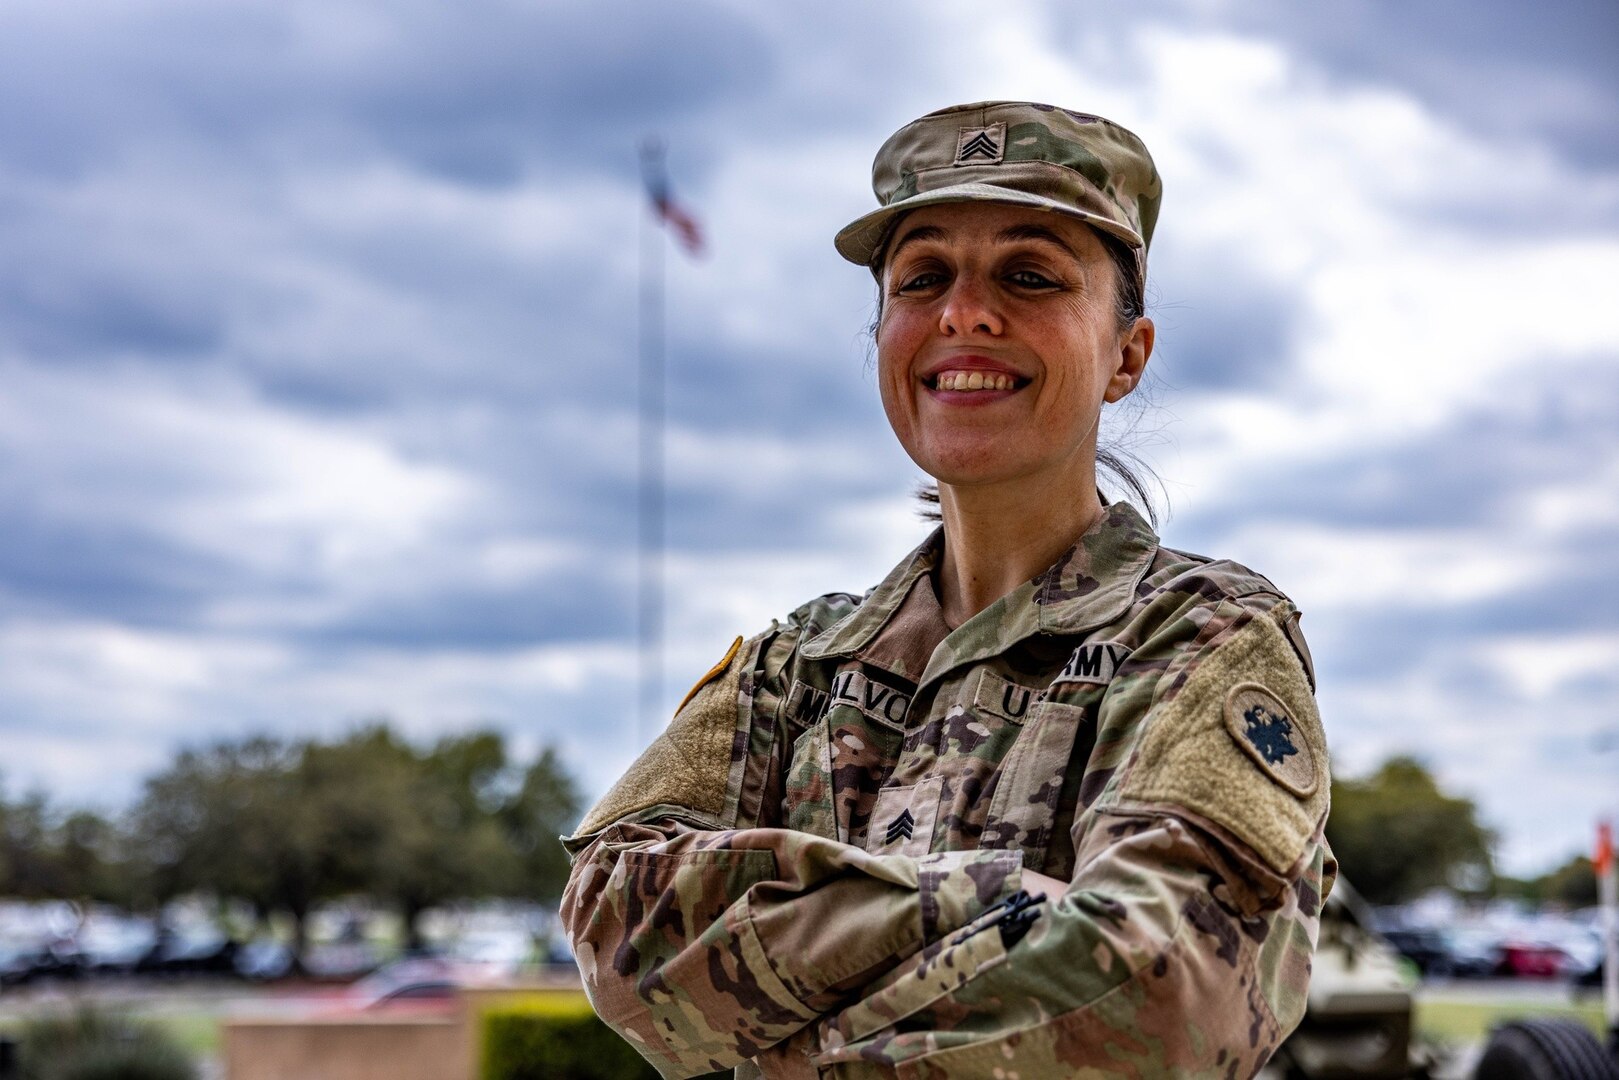 Third generation Soldier shares her inspiration to serve